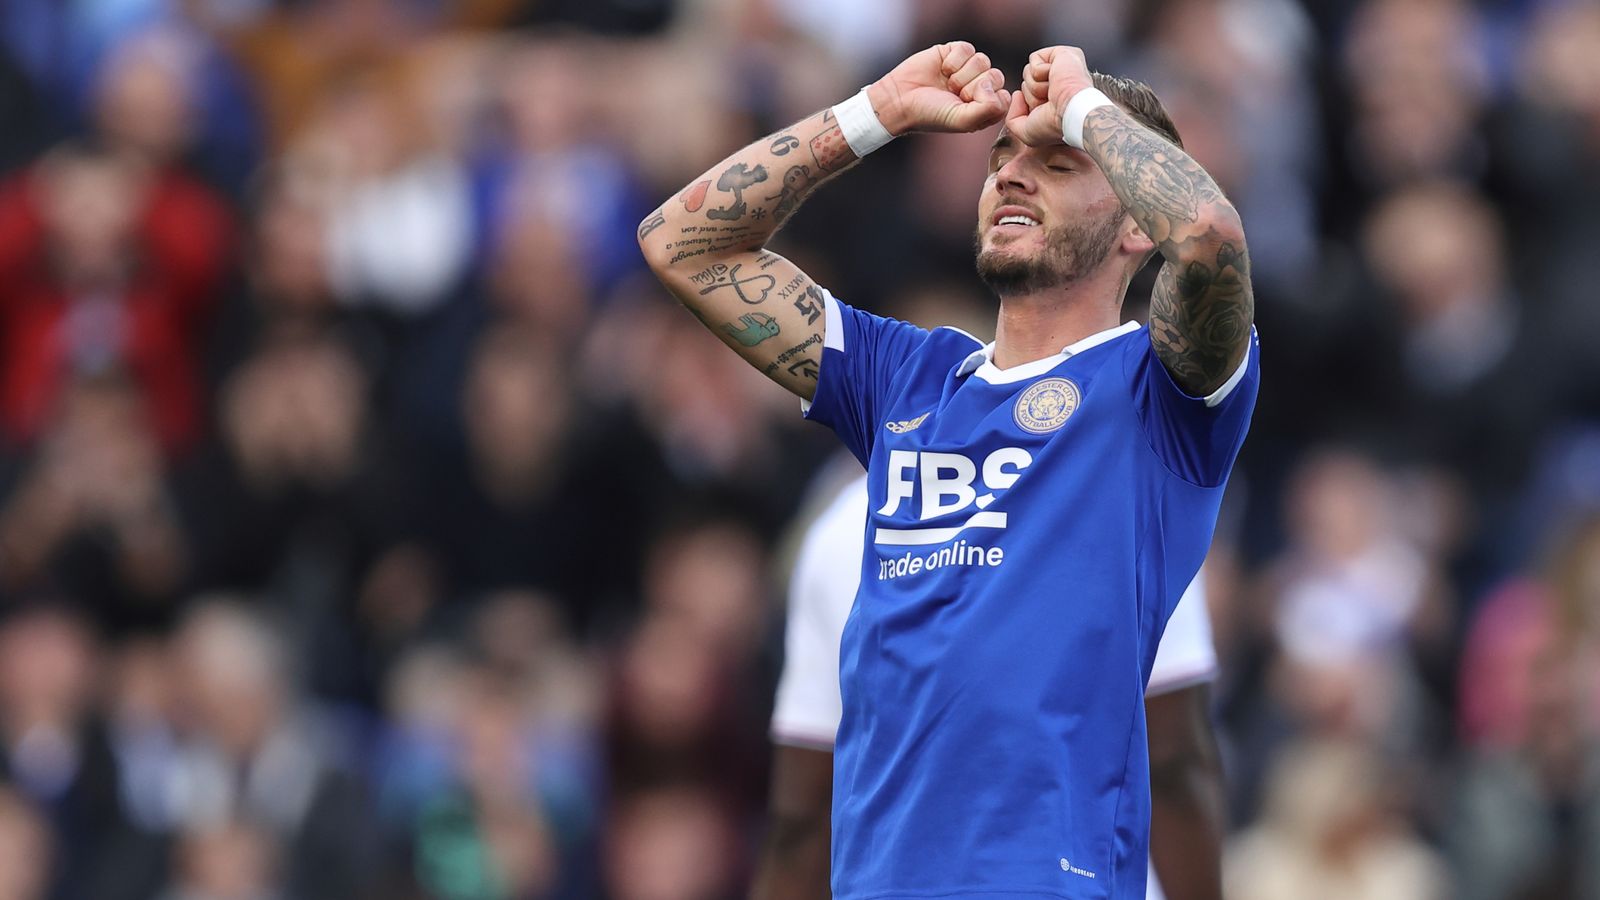 Premier League hits & misses: James Maddison fails to fire in England audition as Ivan Toney makes his case; poor finishing costs Everton